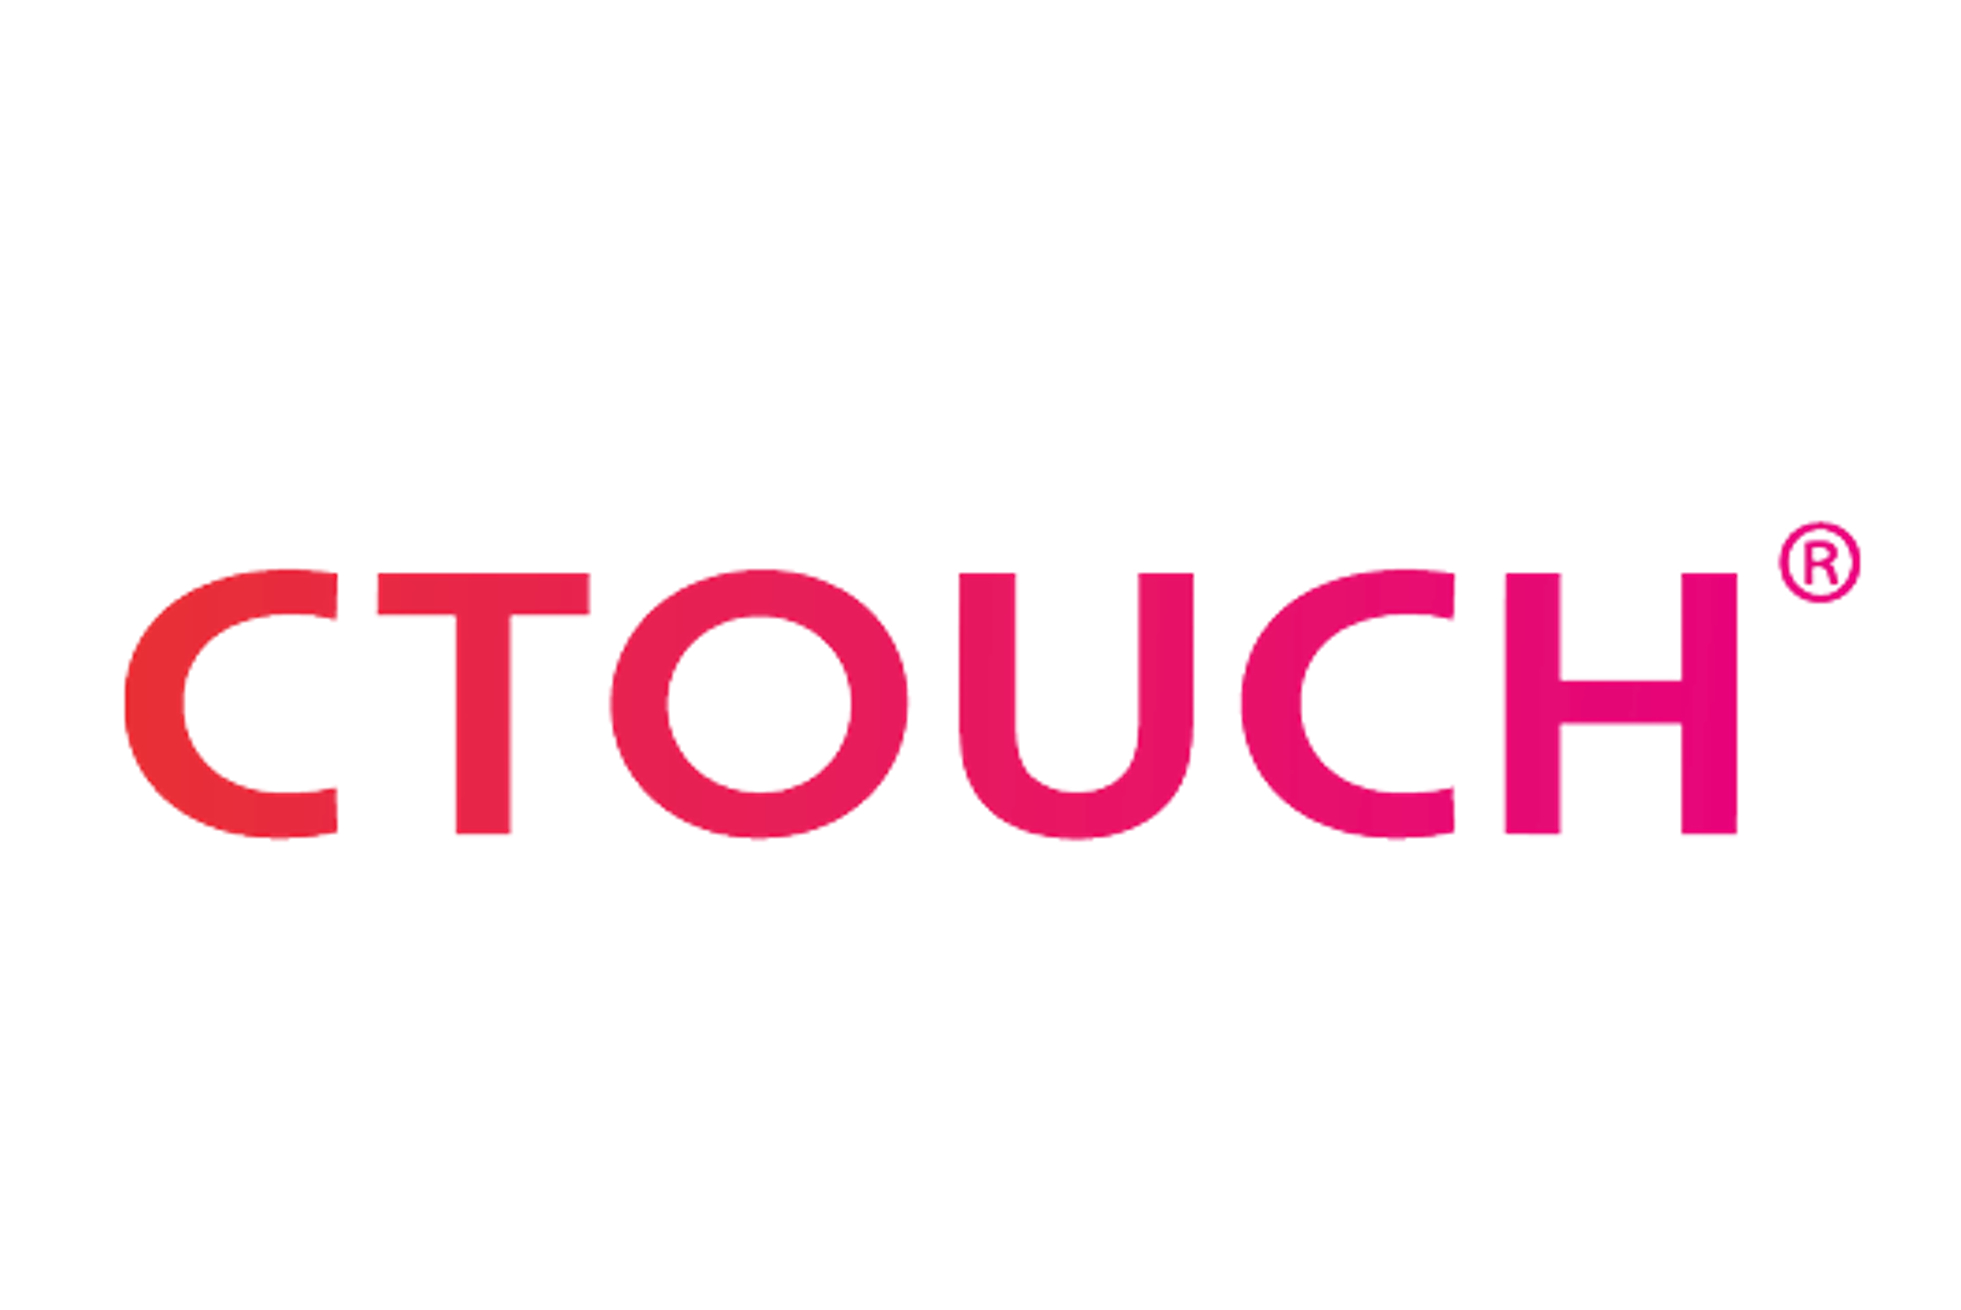 Ctouch logo